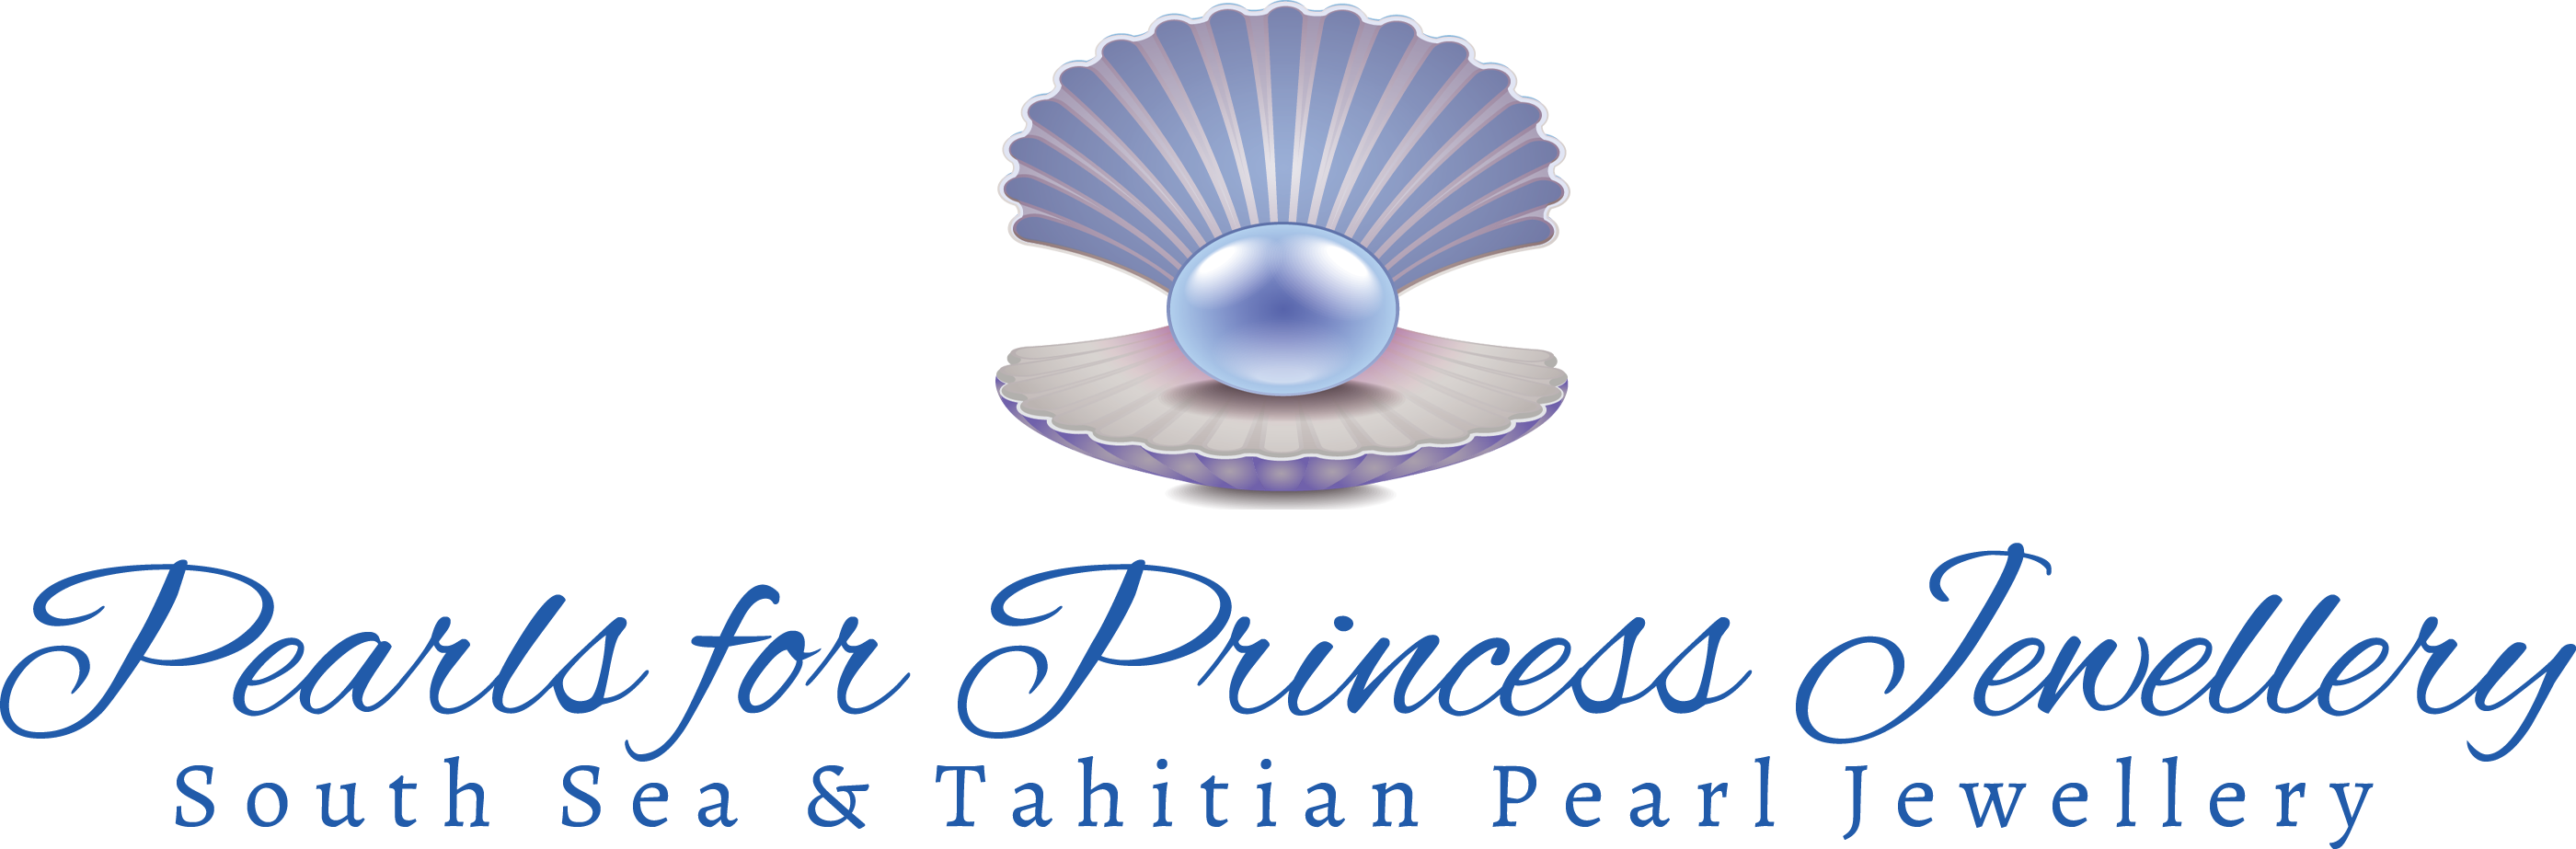 pearls clipart princess necklace